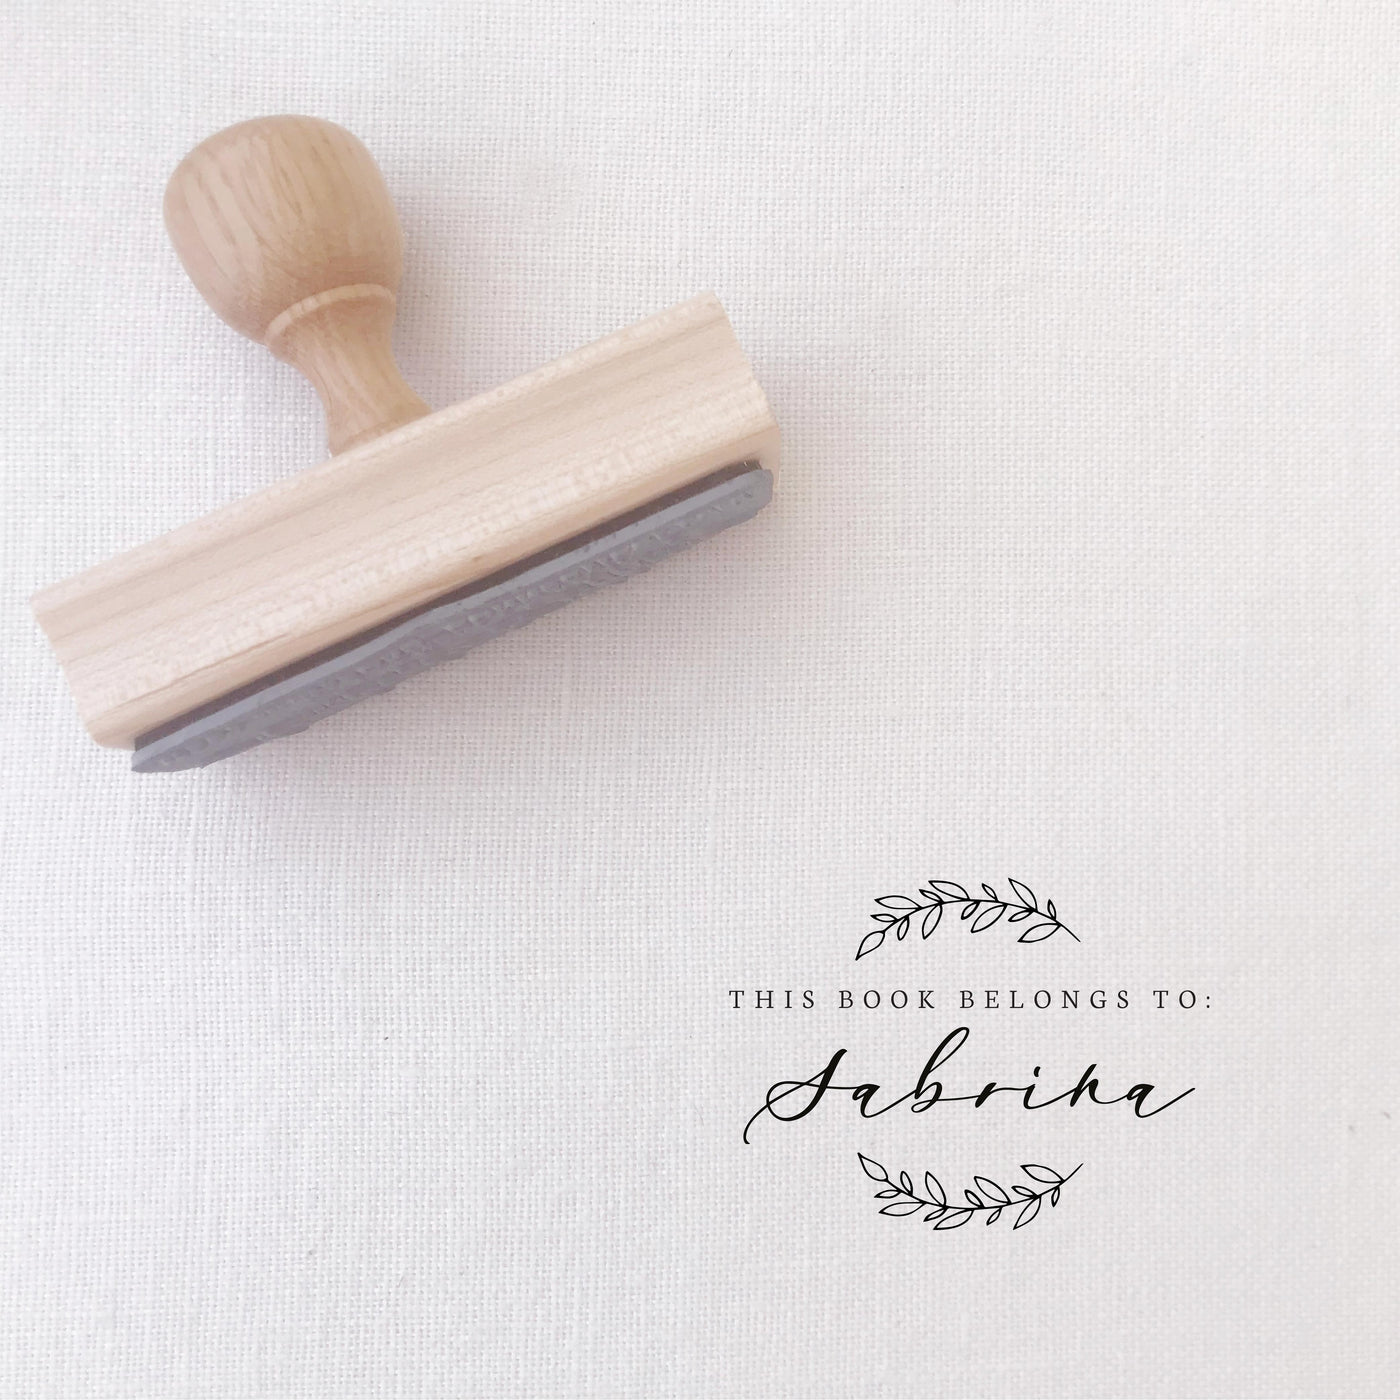 Genevieve Rustic Botanical Calligraphy Script Library Book Stamp | Custom Ex Libre Rubber Stamp with Wooden Handle for Wedding Couple & Family Gift, Luxe Packaging Embellishment | Heirloom Seals